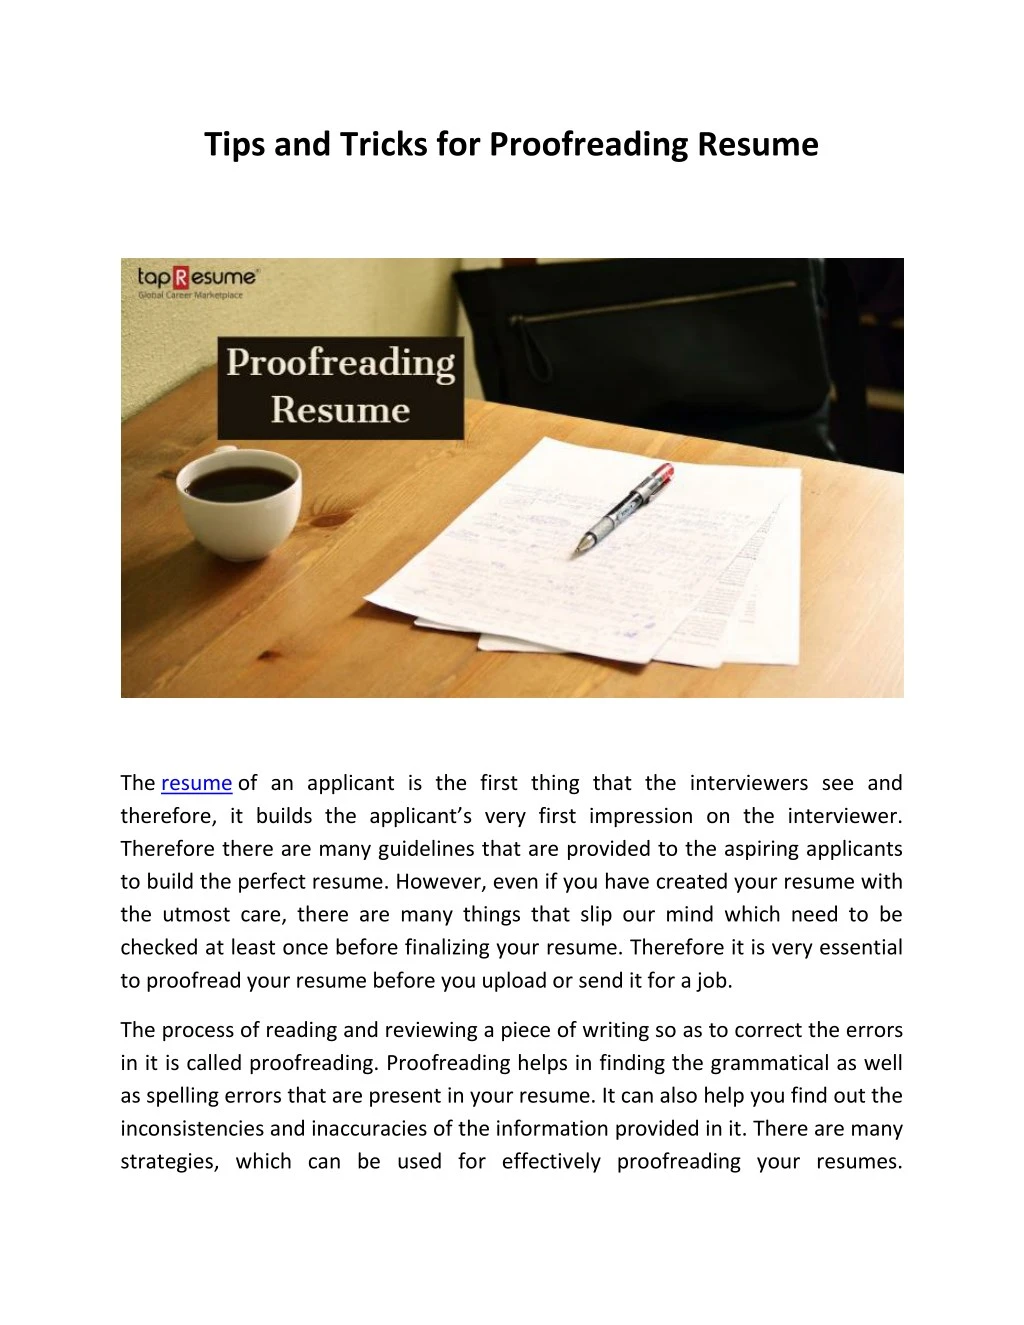 tips and tricks for proofreading resume